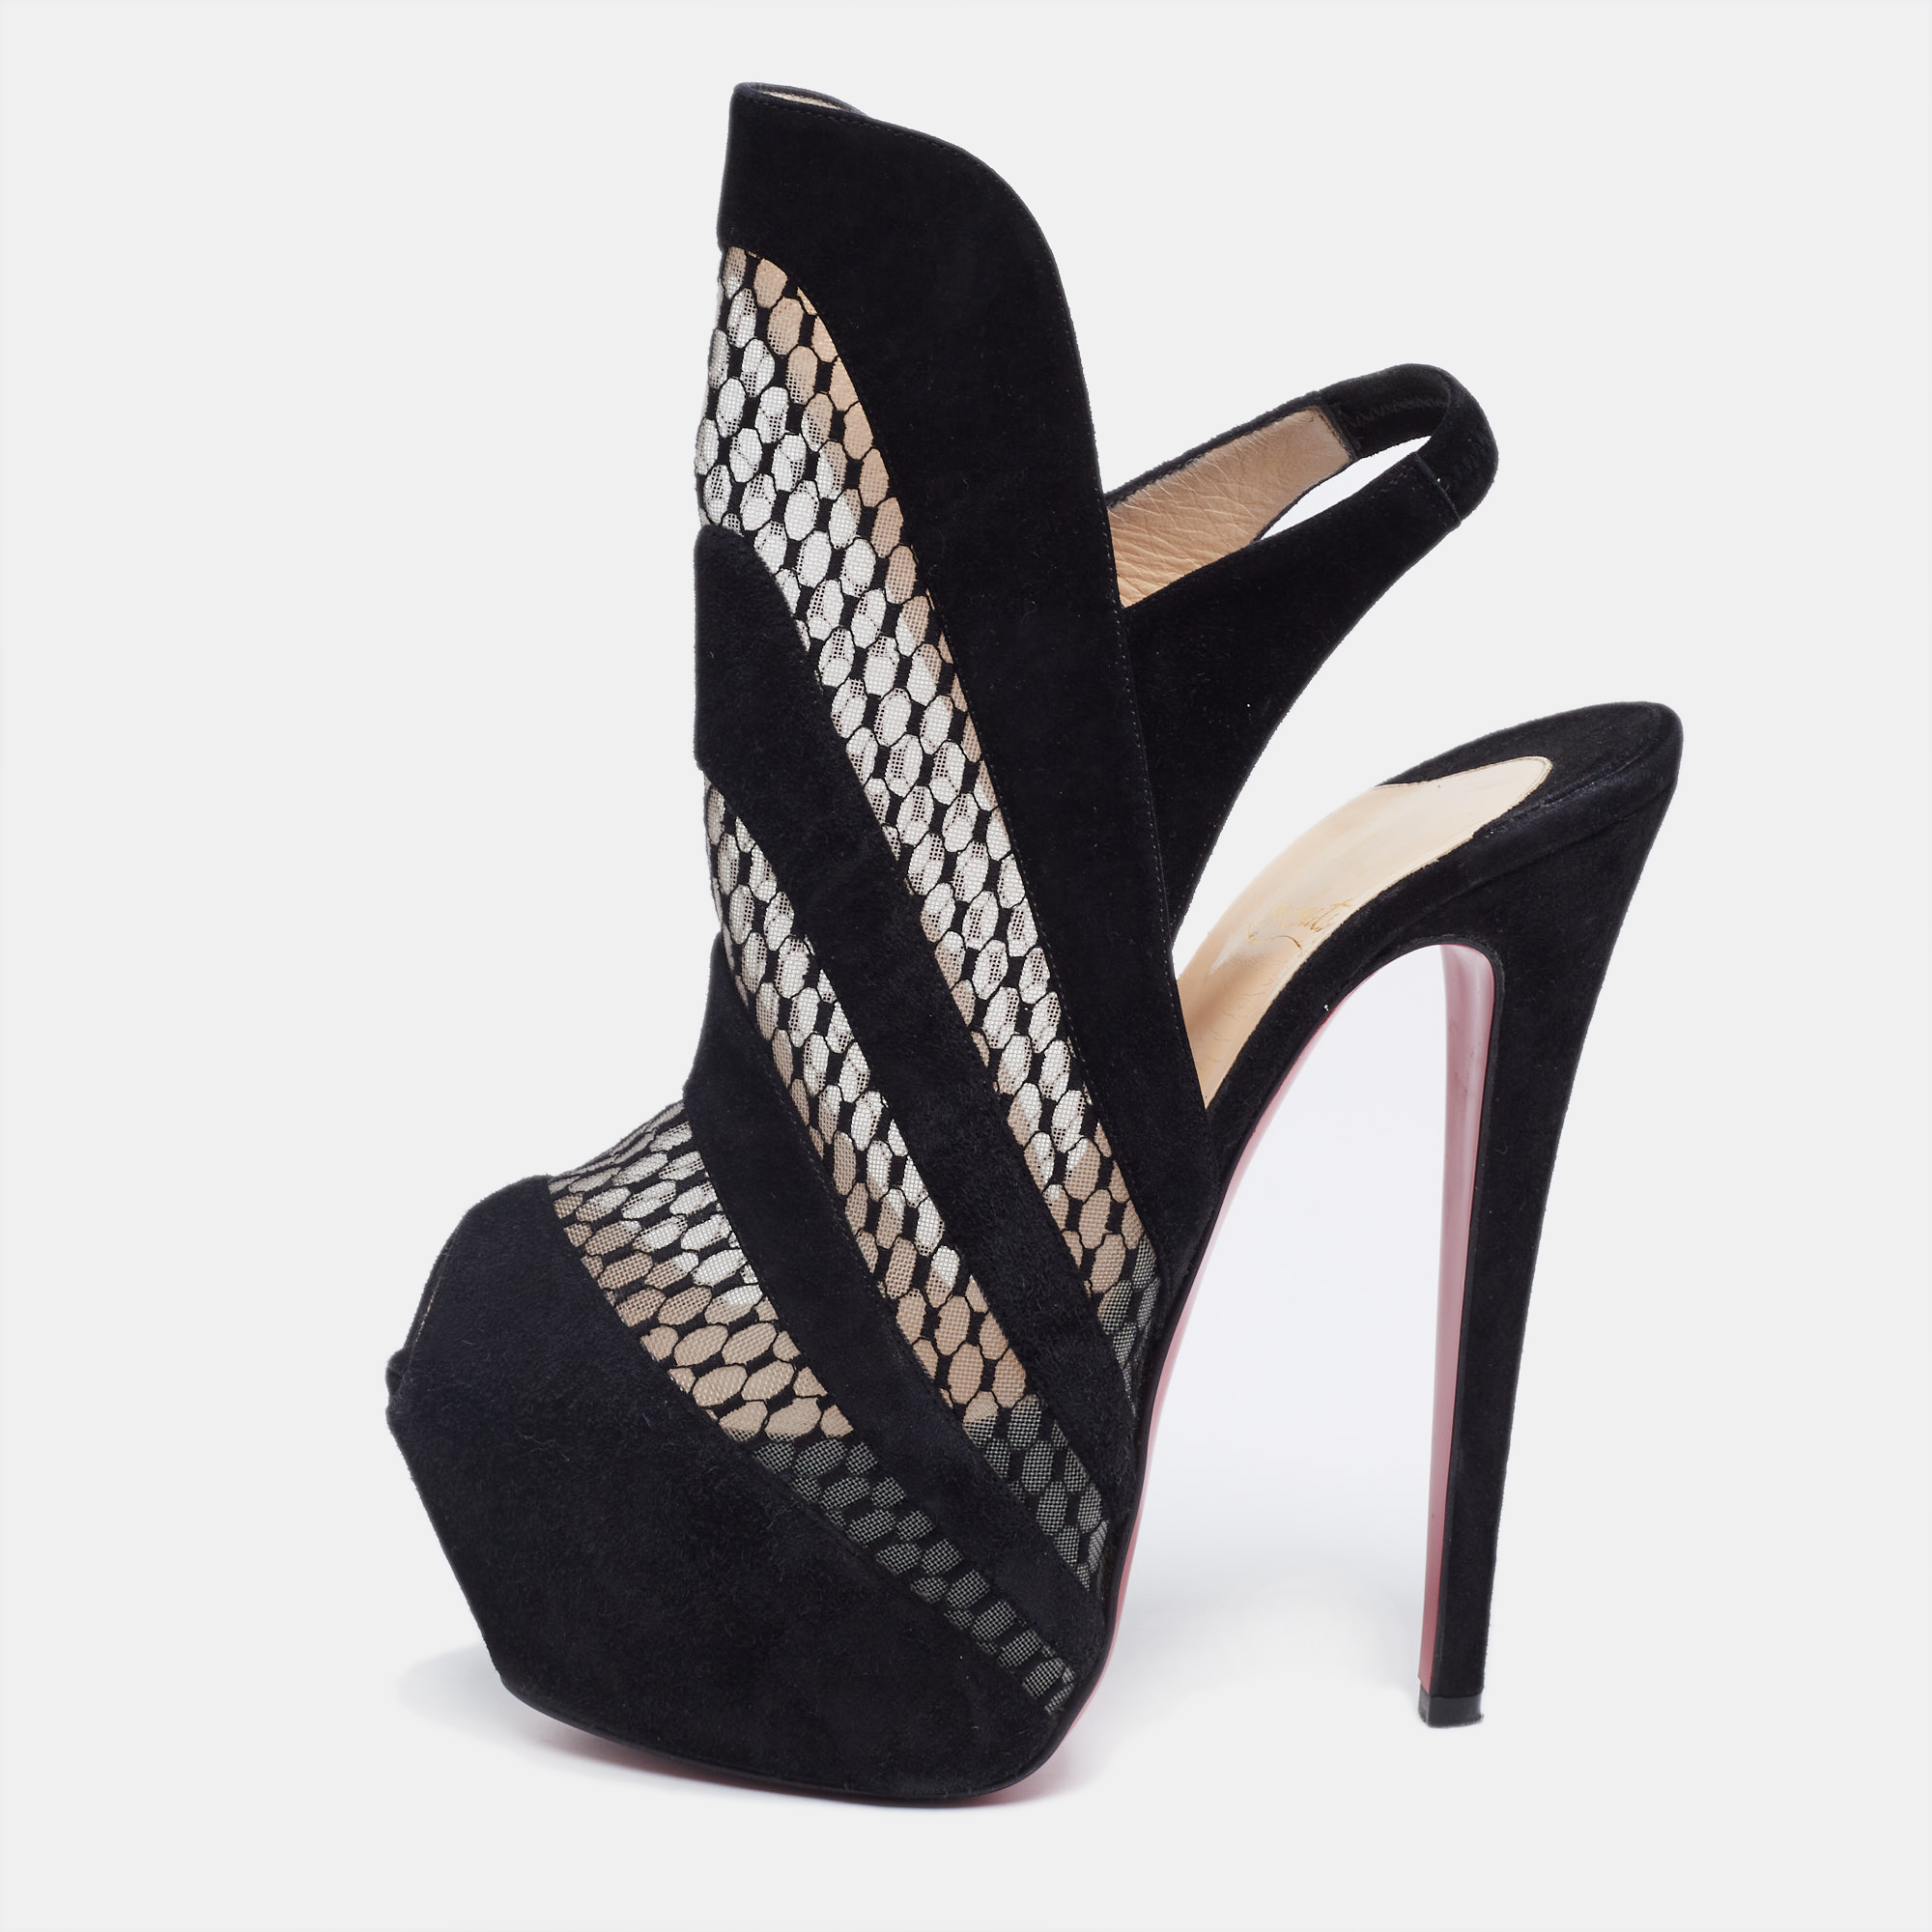 Christian Louboutin Black Suede And Mesh Guizi Platform Ankle Booties Size 38